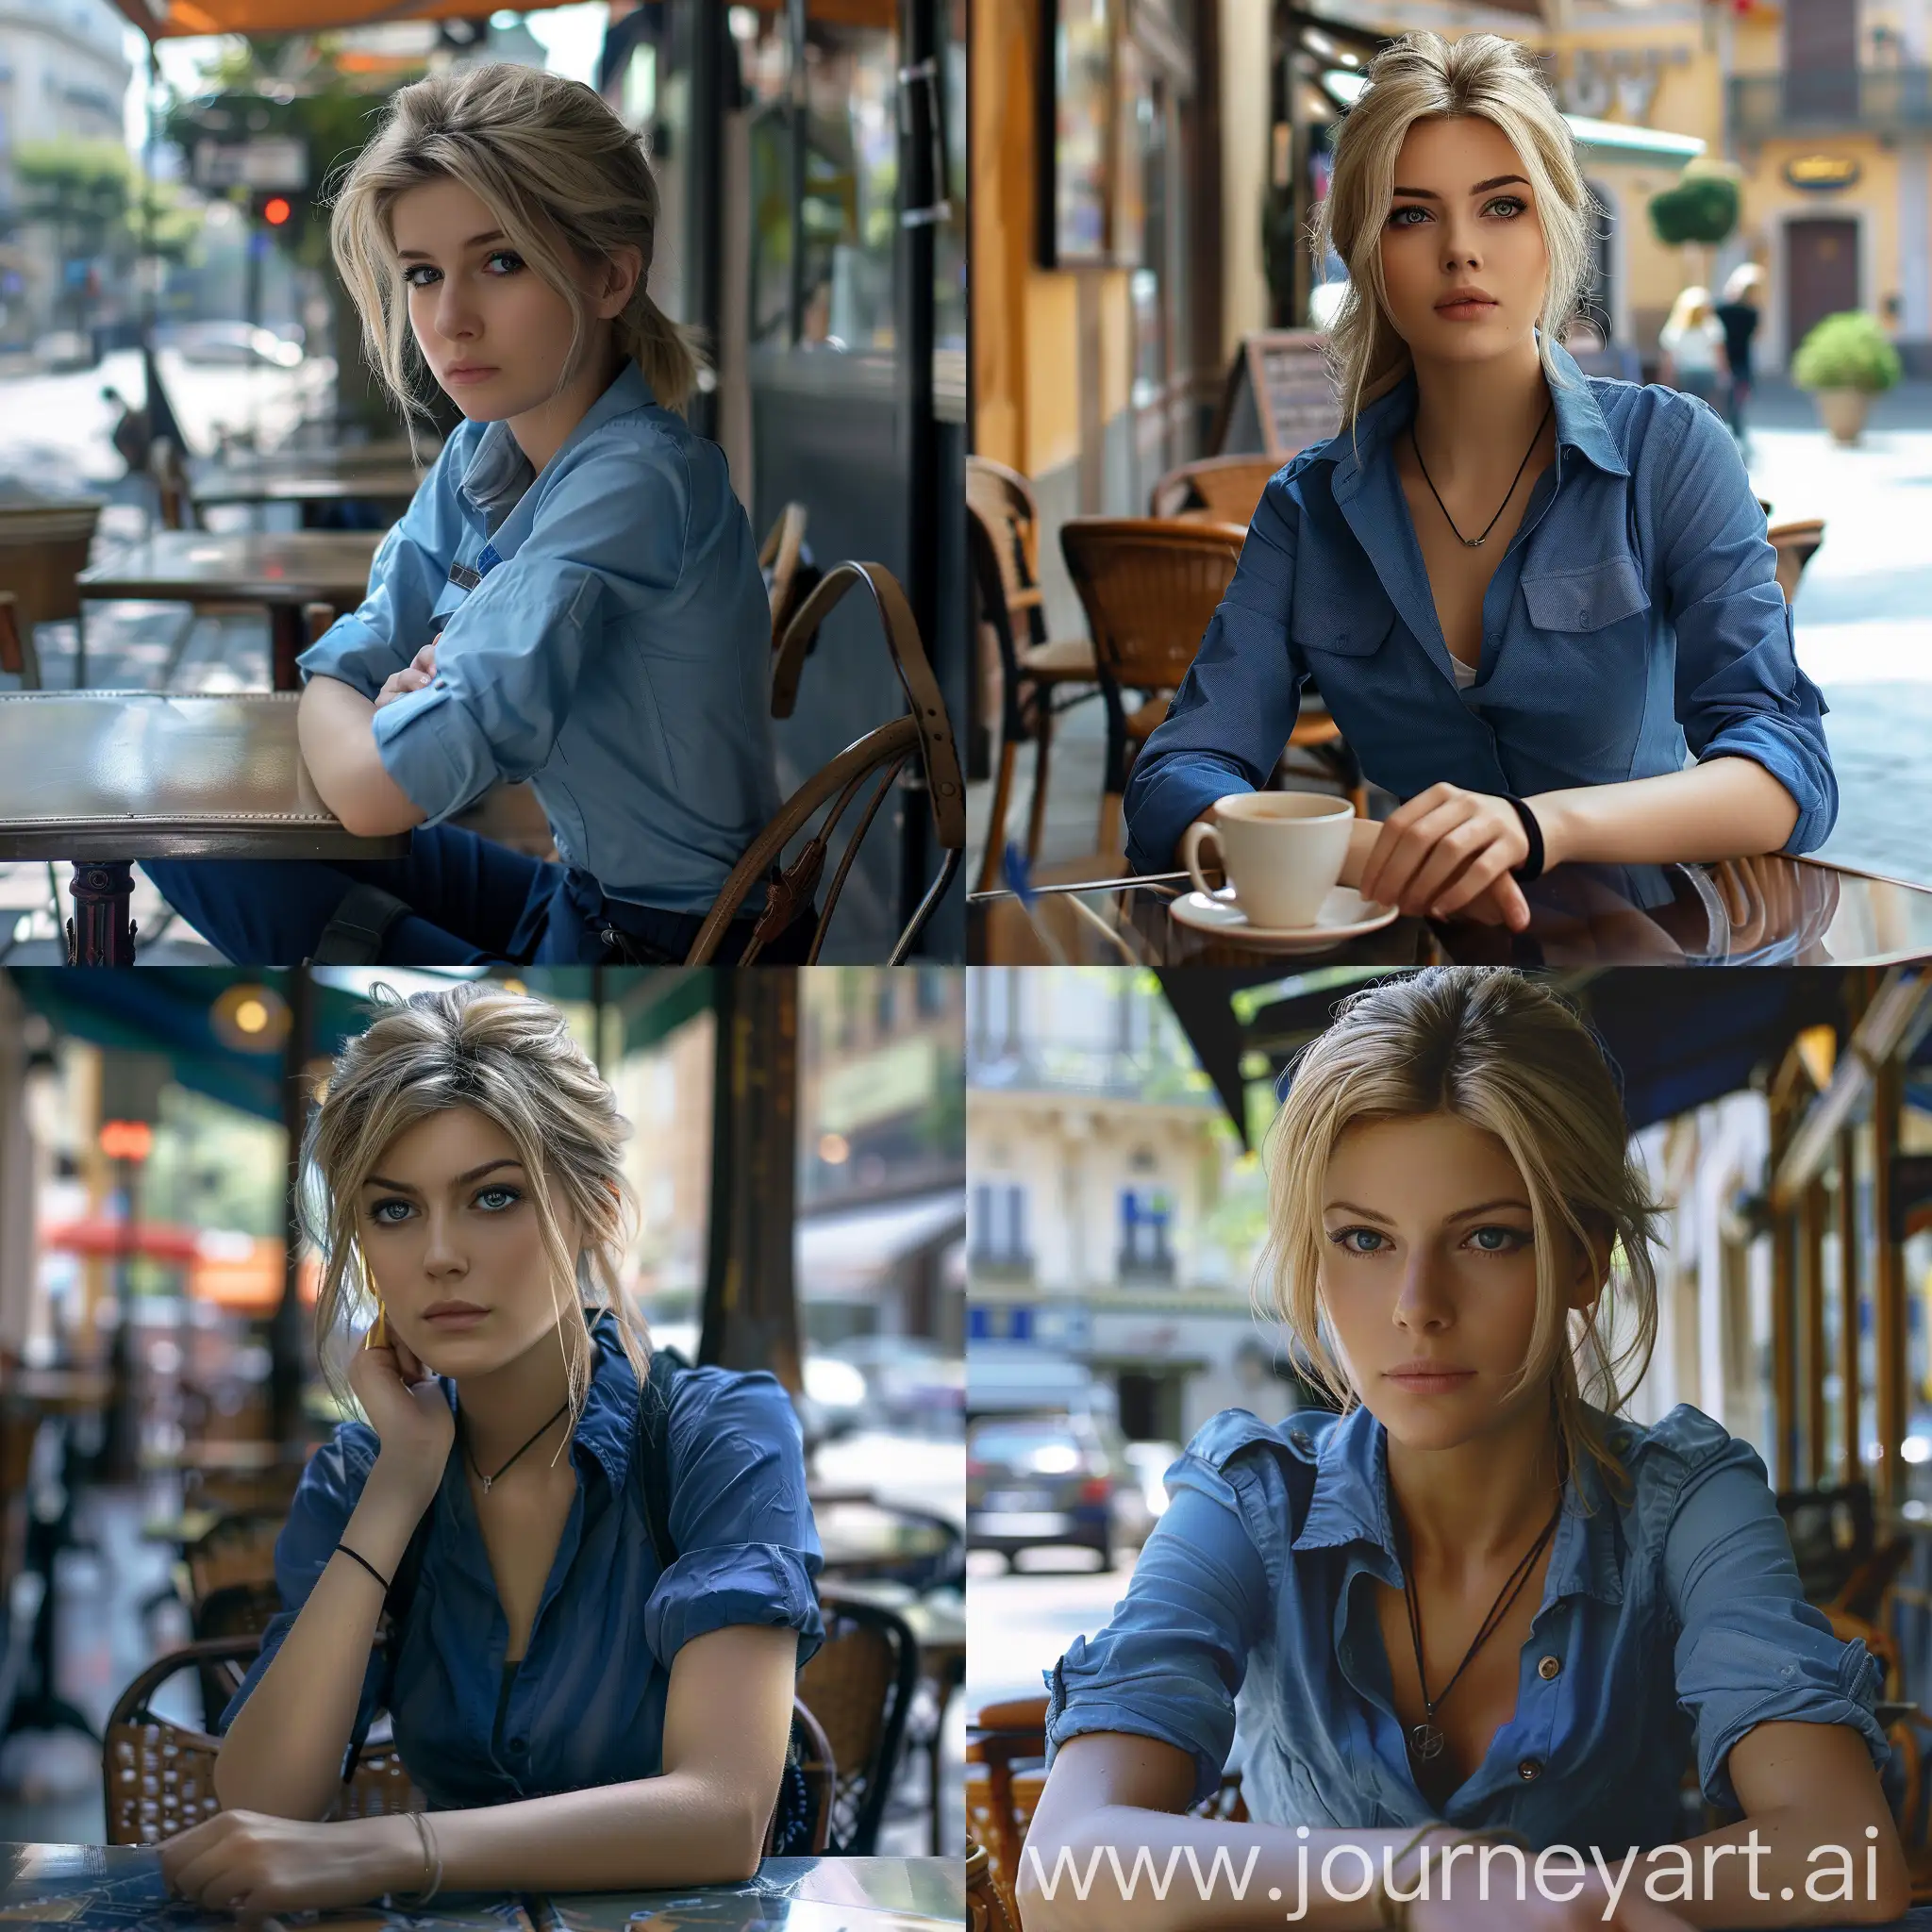 Elegant-Intellectual-Beauty-Jill-from-Resident-Evil-at-Outdoor-Cafe